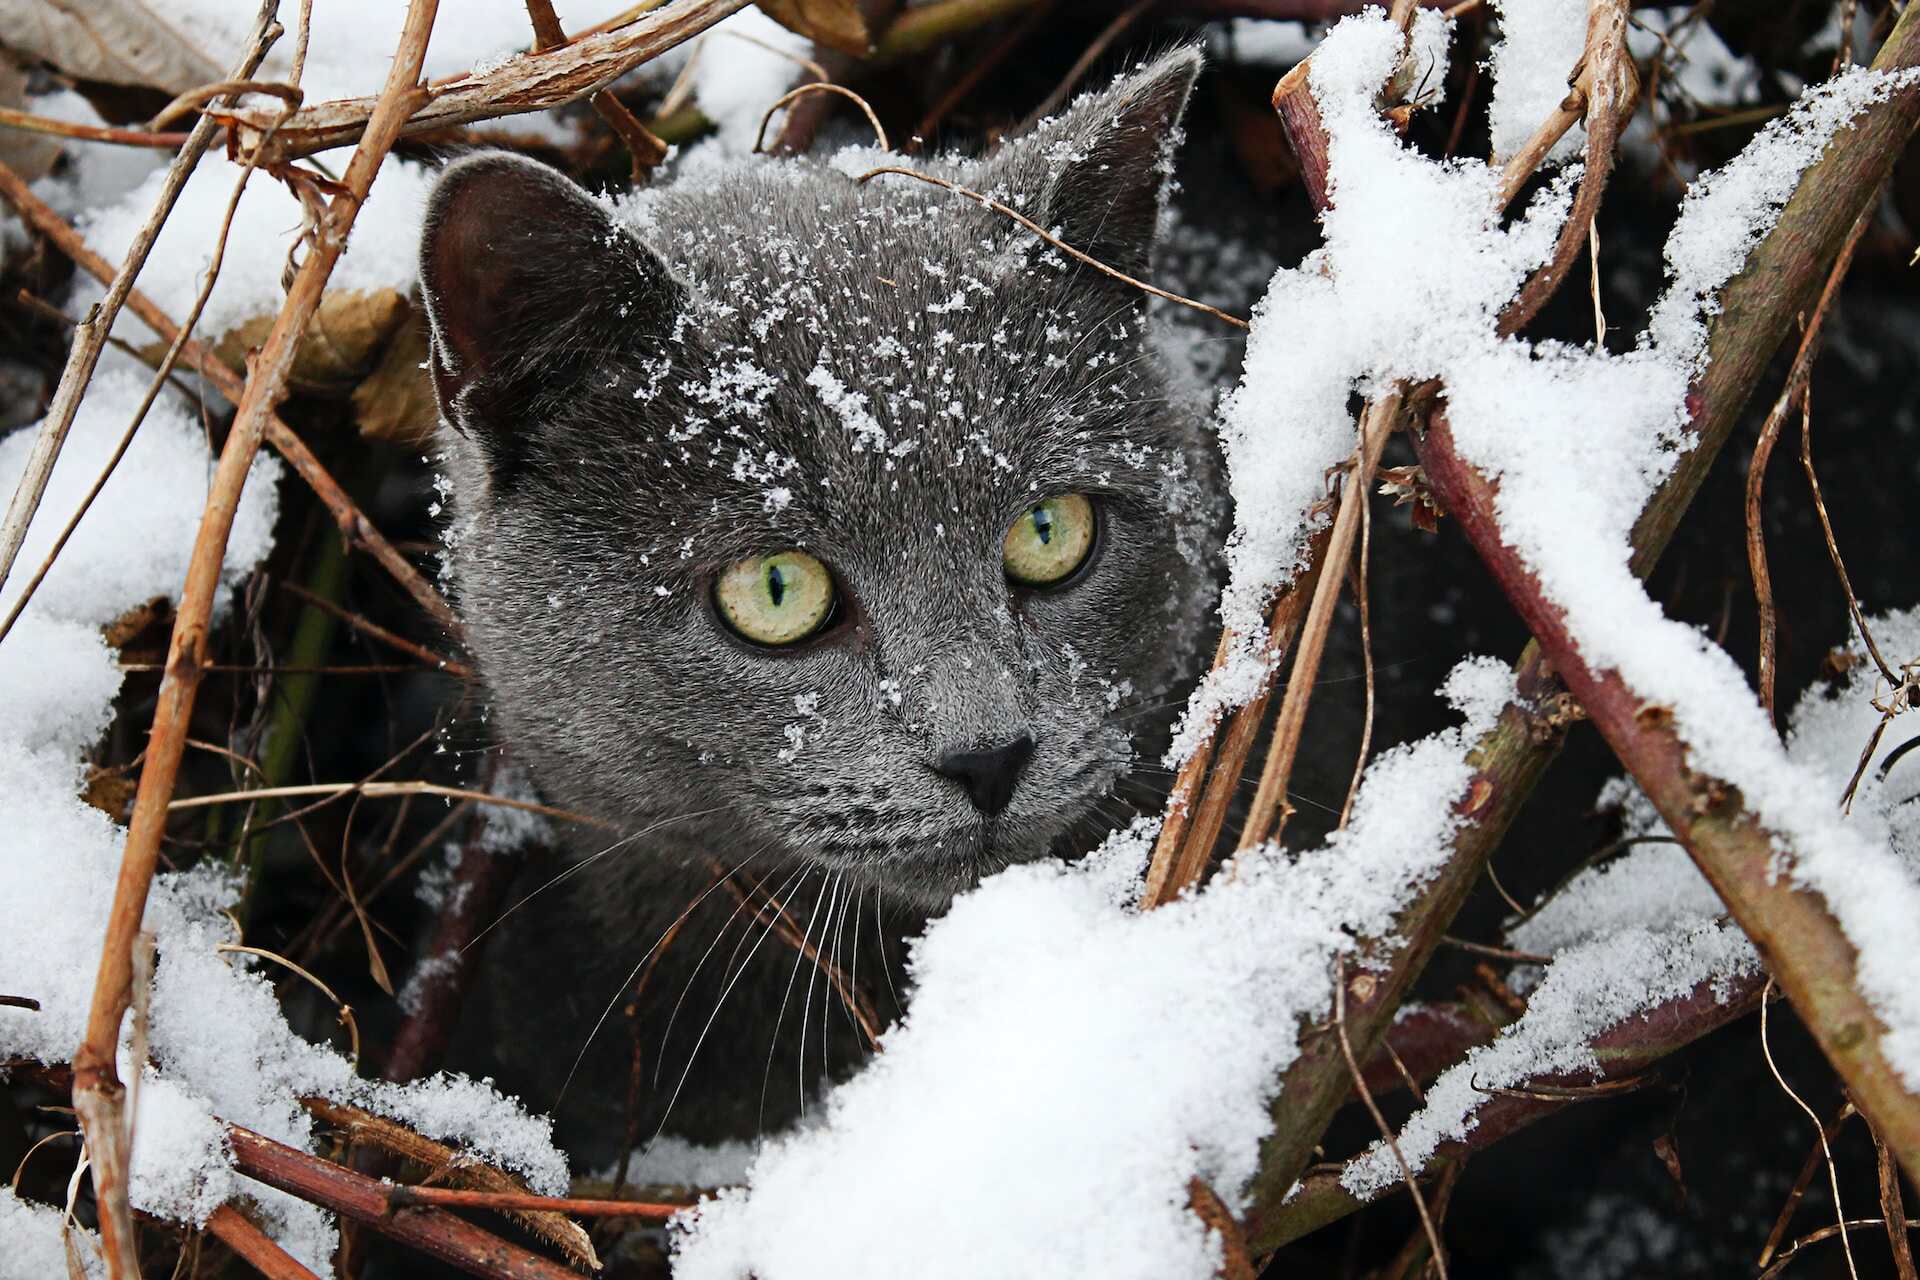 A cat exploring the snow in a forest